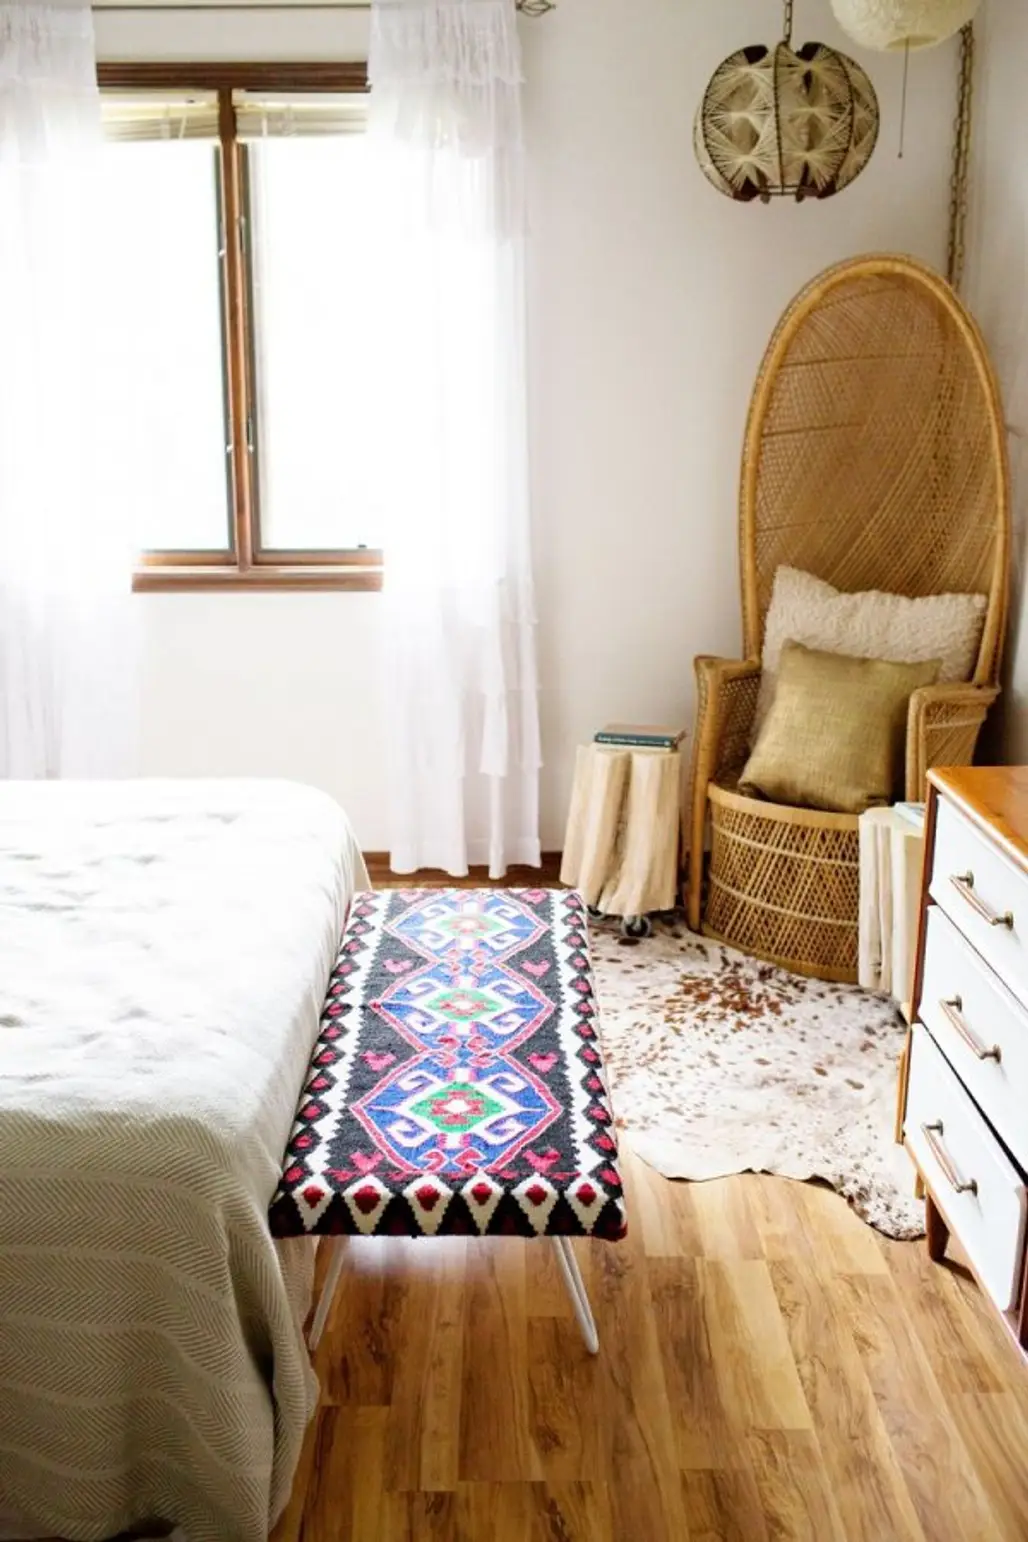 Cover a Bench with a Pretty Rug